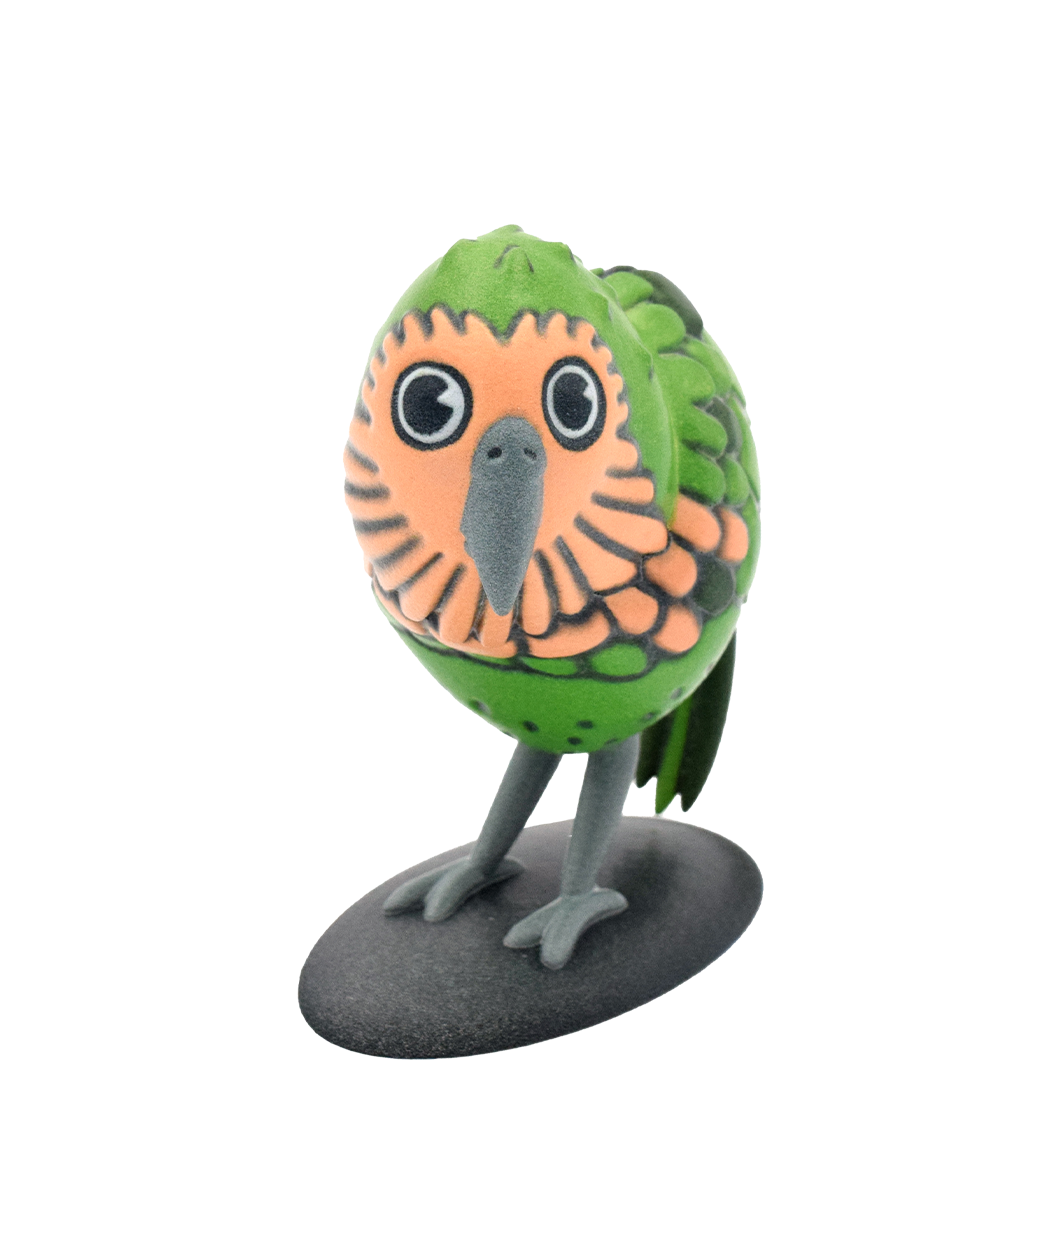 A 3d printed kakapo with a tan face, gray beak, with green and dark green feathers, dark gray legs, standing on a black disc base - from Bizarre Beasts